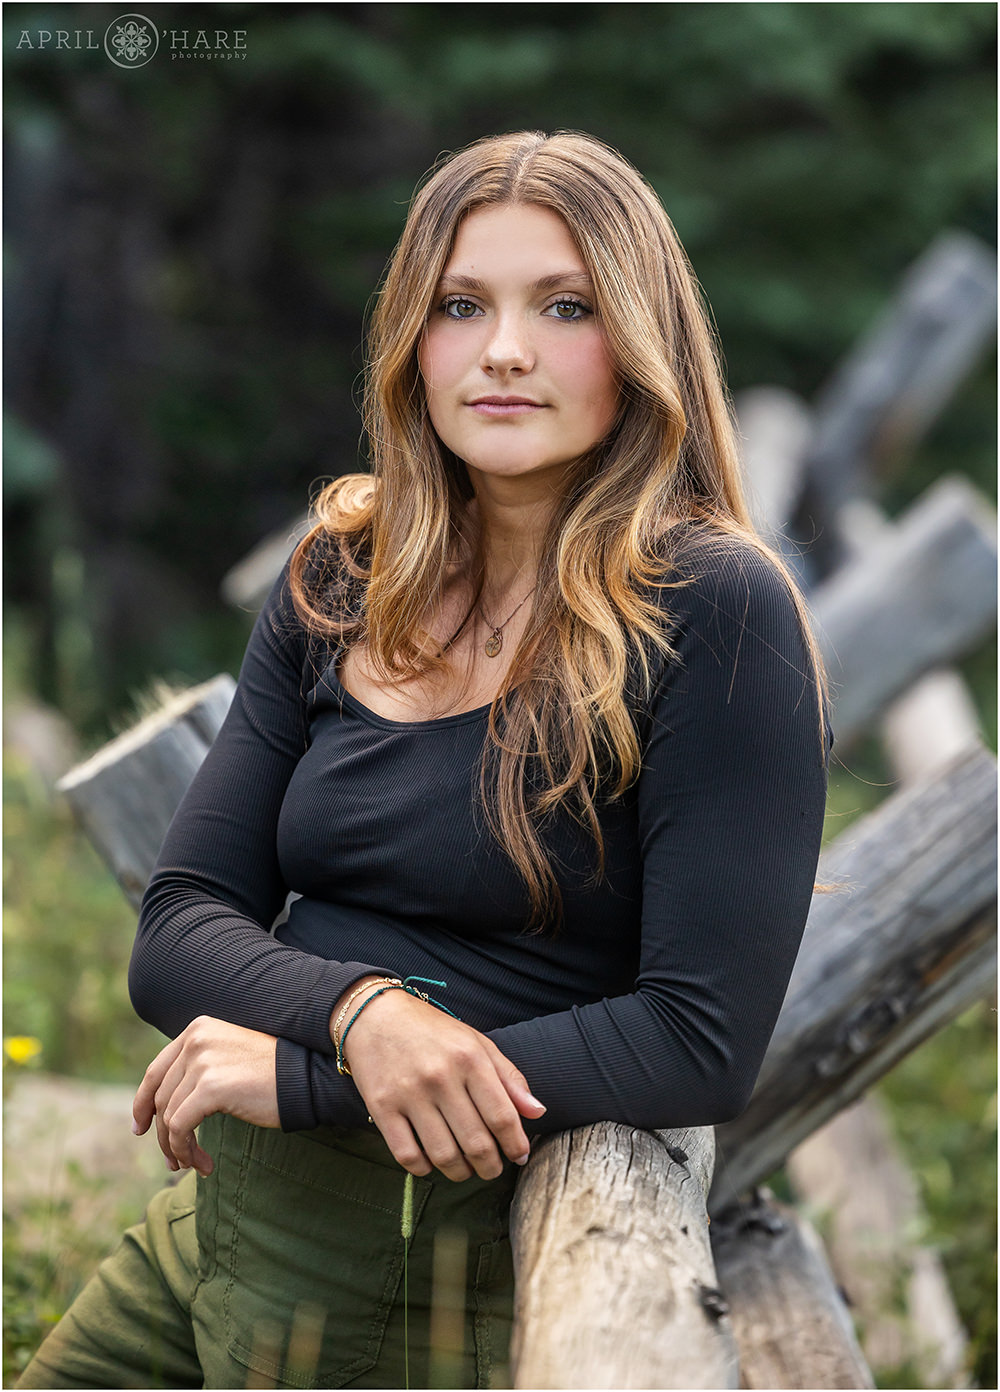 Gorgeous senior girl with a serious expression on her face wearing a black top with long sleeves at her senior portrait session in Evergreen CO